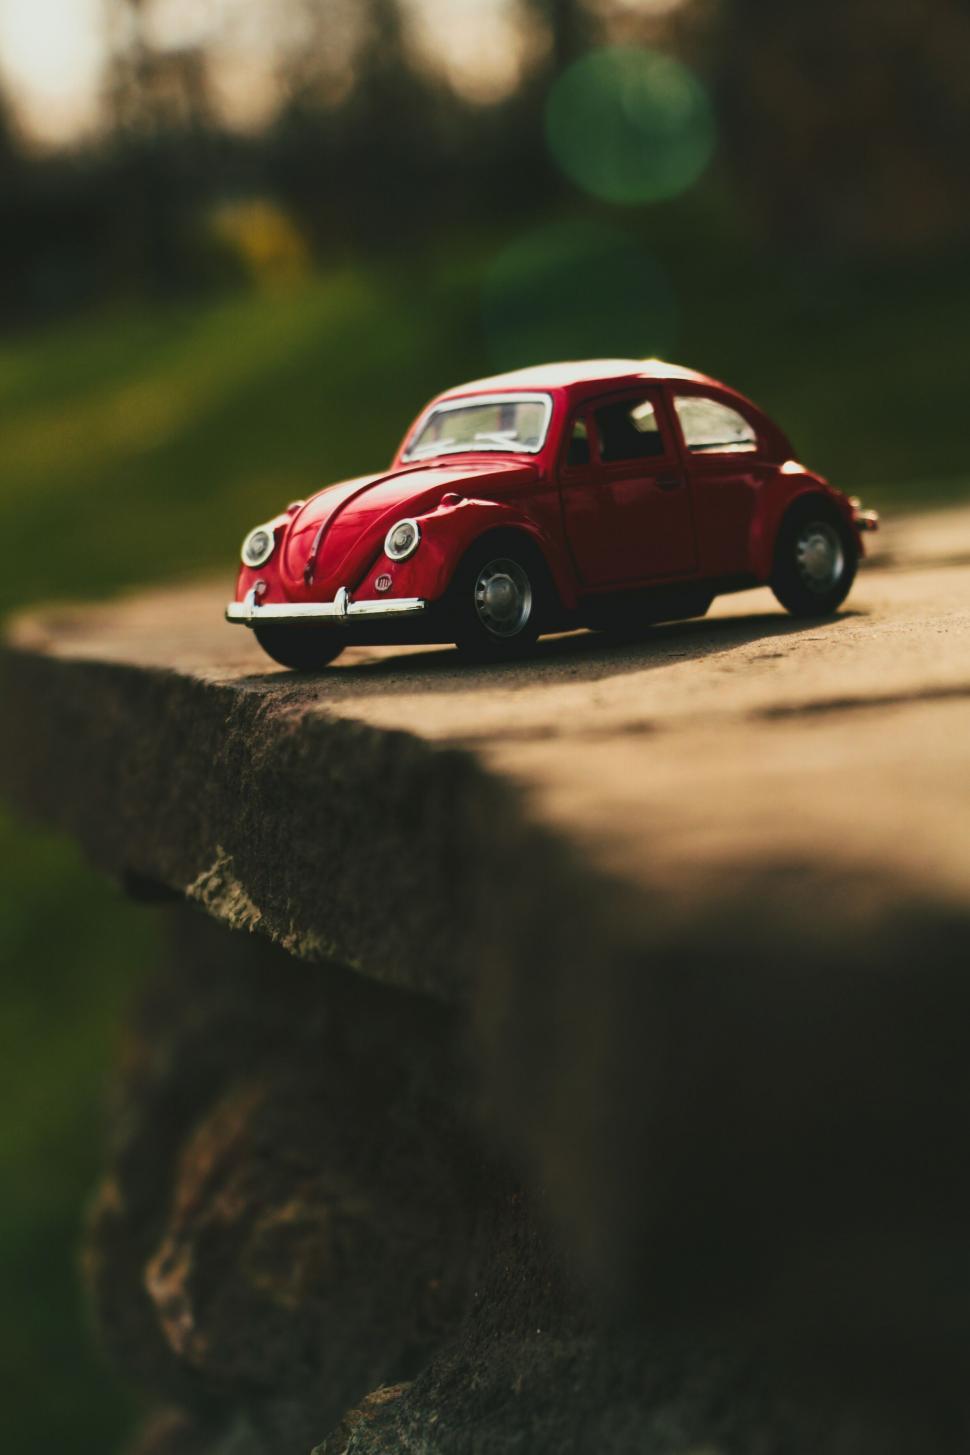 Free Image of Small Red Car on Cement Slab 